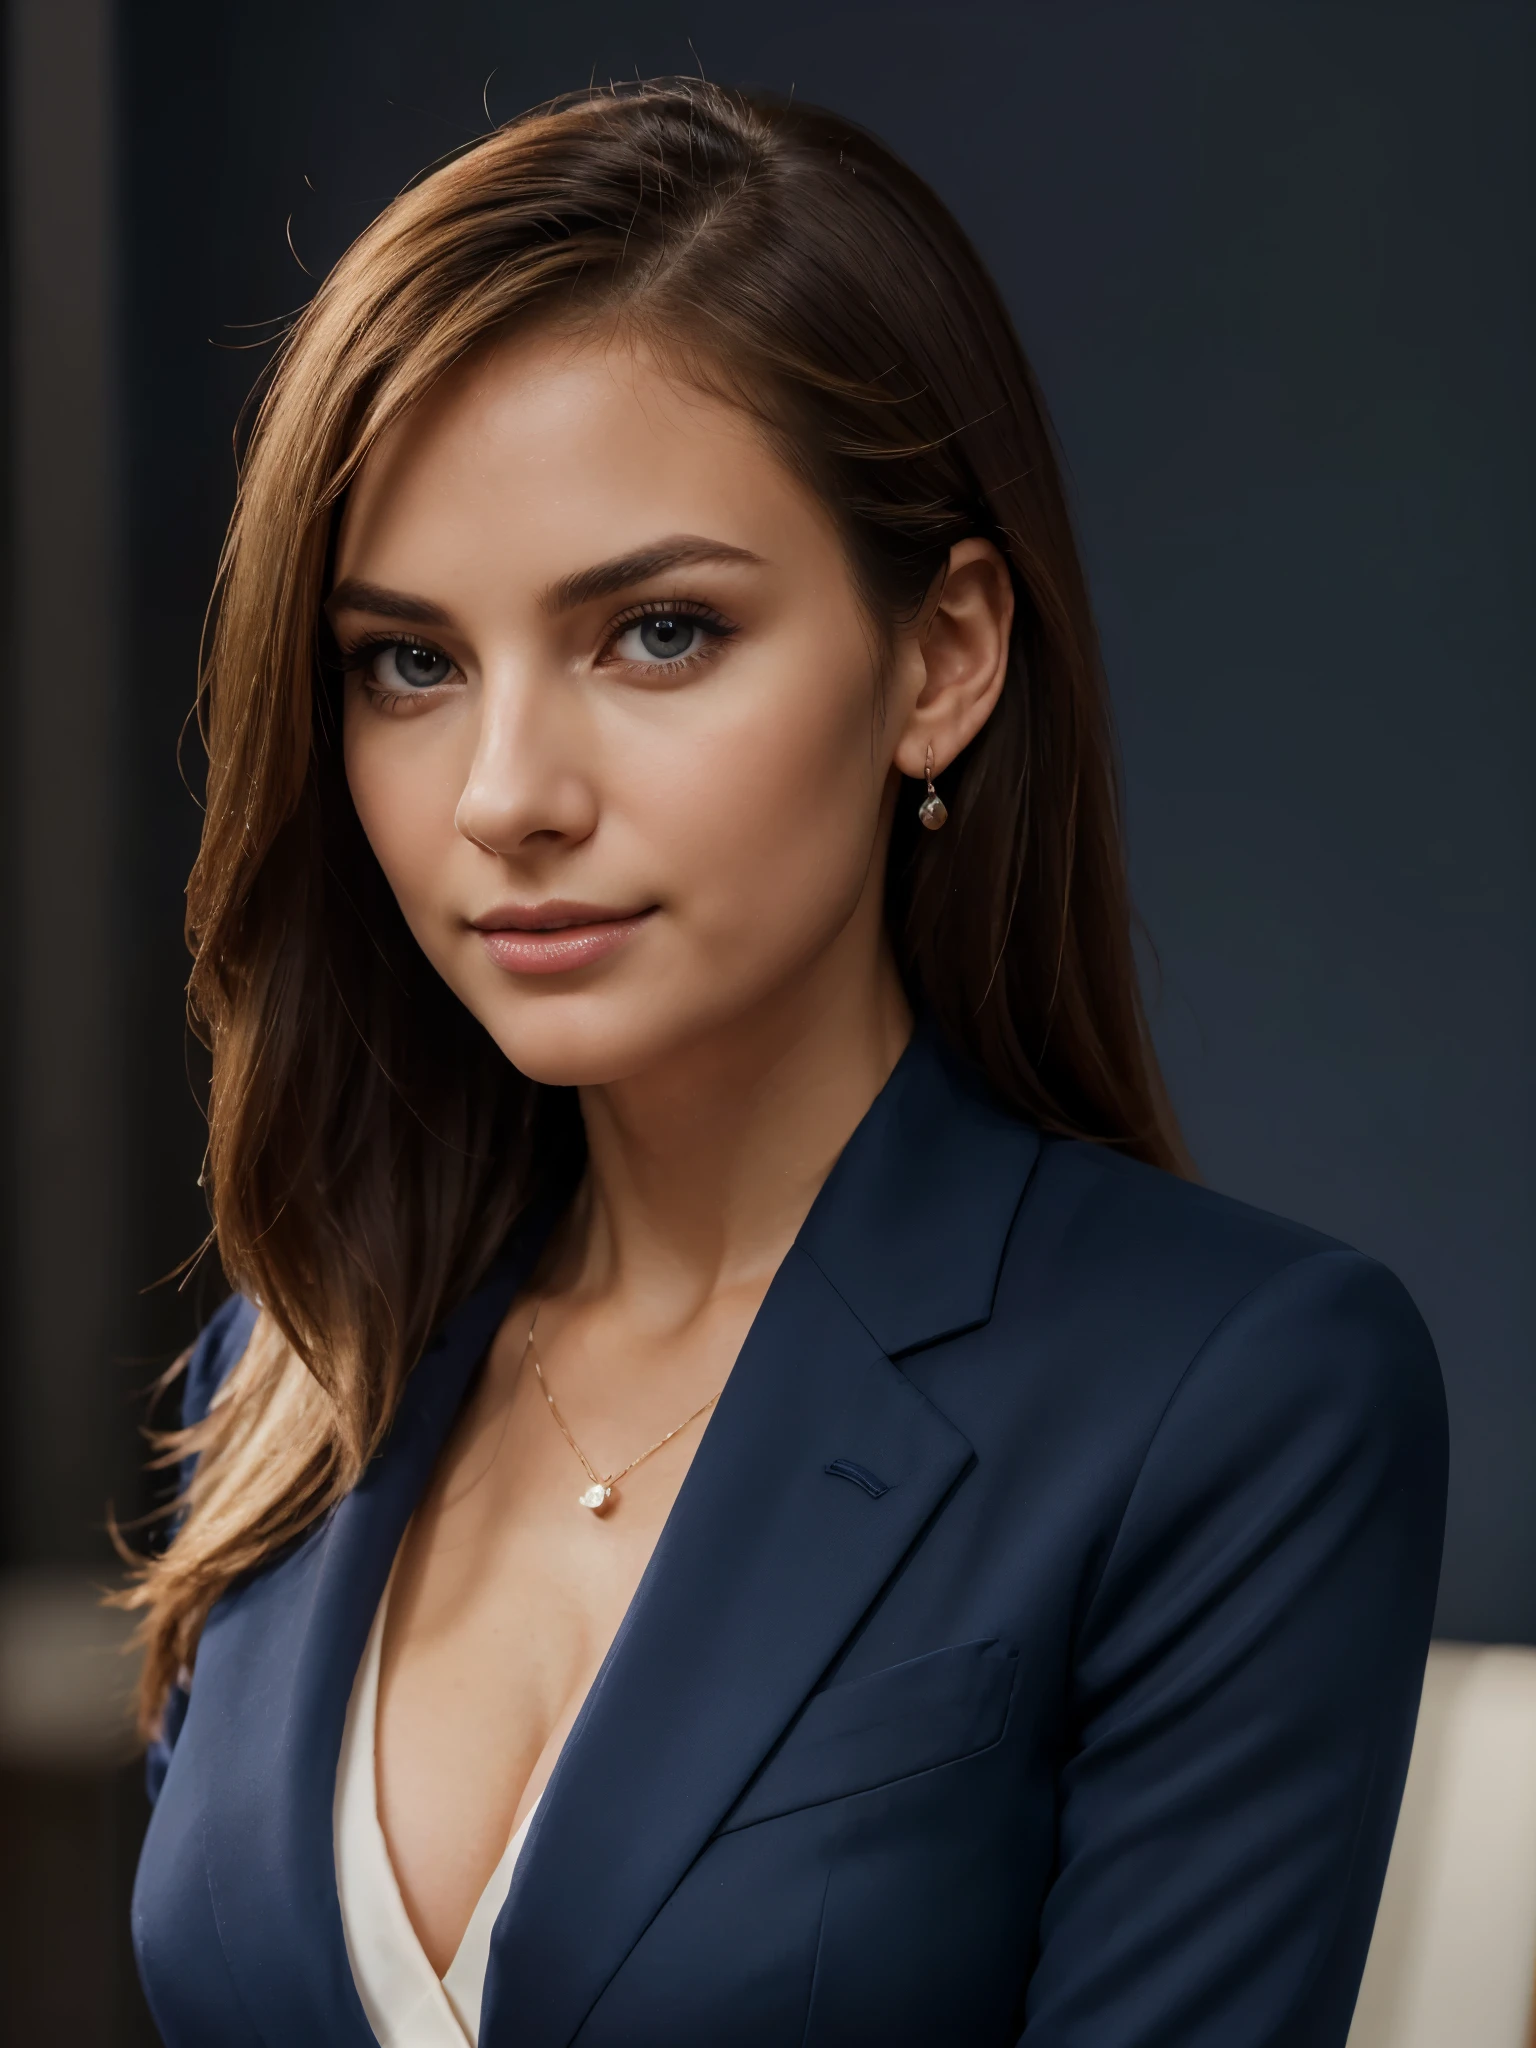 ((sfw:1.2)), (highres:1.2),(best quality:1.2),(professional:1.1),(portrait:1.1), navy dark blue profesional blazer clothes, blonde hair,upper body,female,stylish,elegant,corporate attire,businesswoman,headshot,beautiful,American,photo for CV,confident expression,neutral background,sharp focus,vivid colors,subtle makeup, eyes,sophisticated pose,professional lighting,high-key lighting,soft shadows,relaxed posture,exceptional detail,crisp lines,polished look,fine texture on navy blue clothing,delicate jewelry,refined features,graceful demeanor,classic beauty,perfect complexion,subtle smile,attractive woman,striking appearance,impressive confidence,neatly arranged hair,subdued colors
